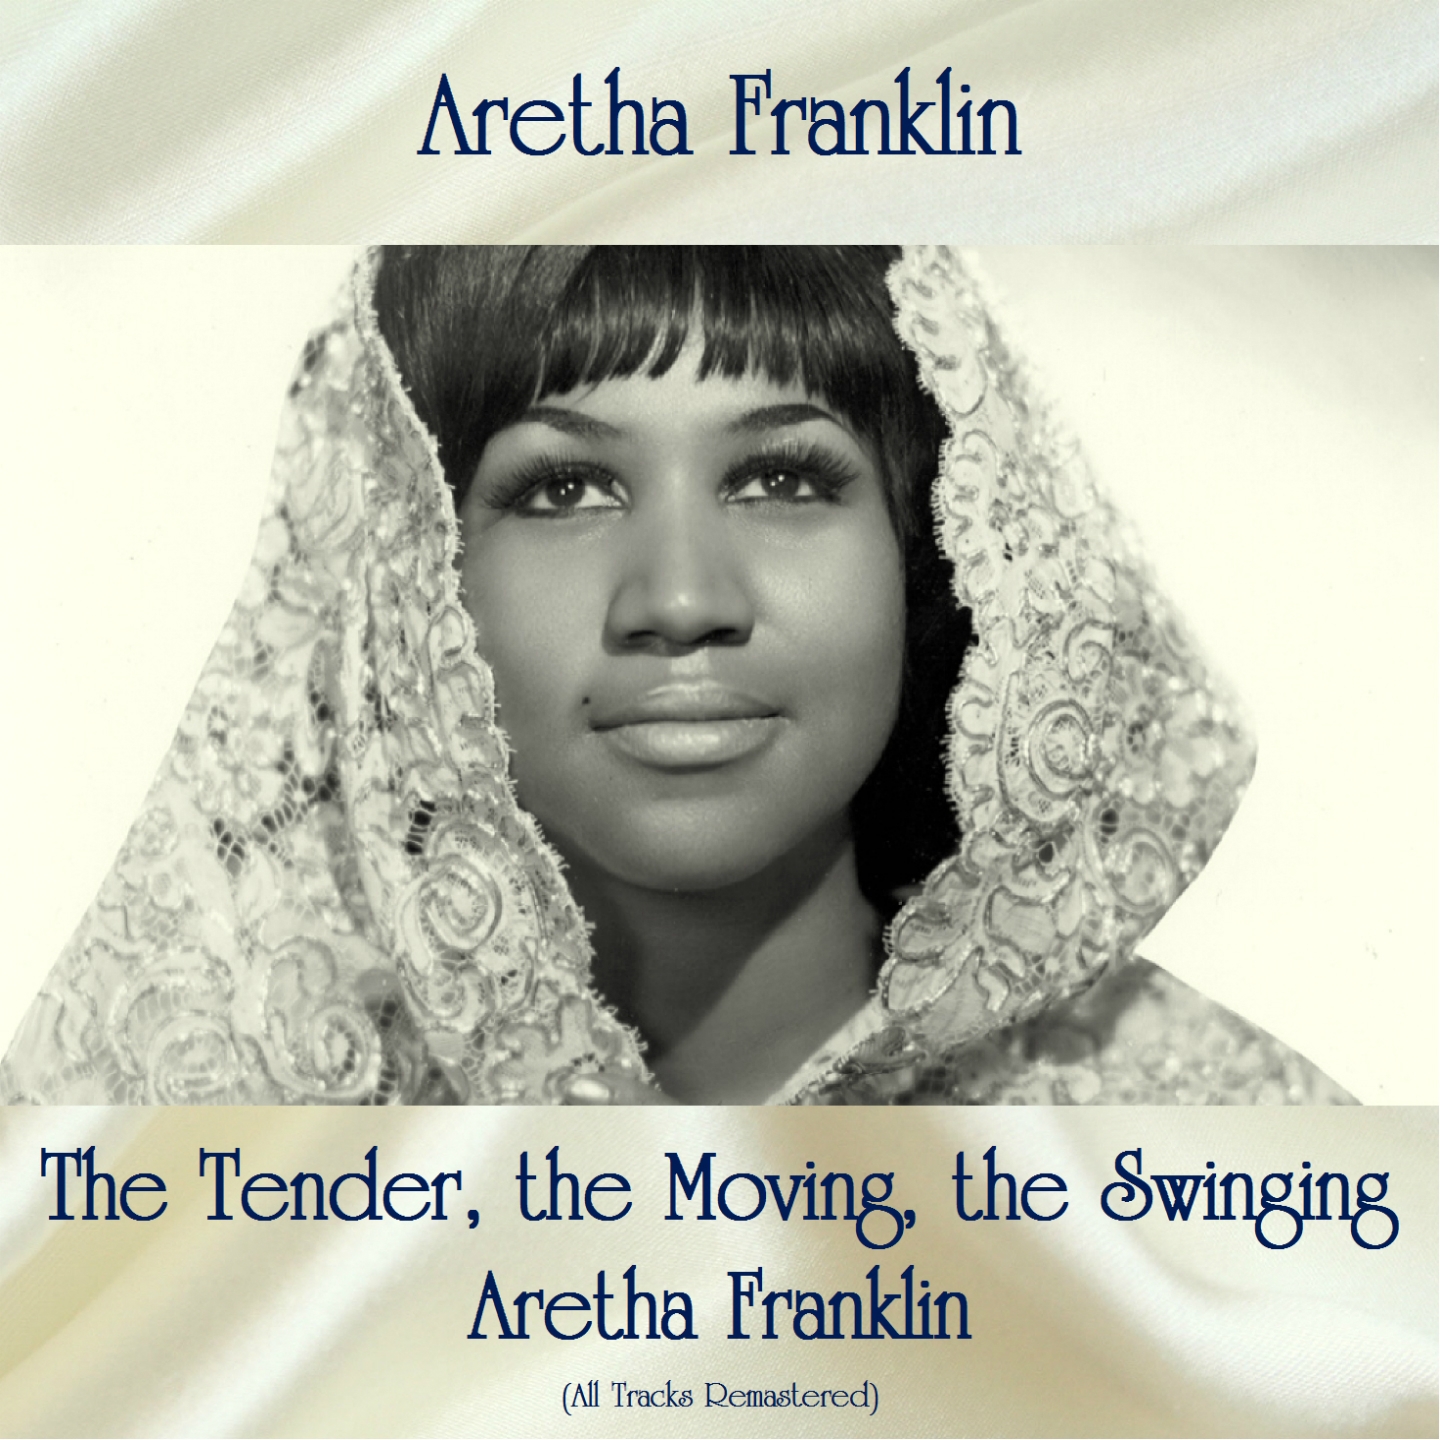 The Tender, the Moving, the Swinging Aretha Franklin (All Tracks Remastered)